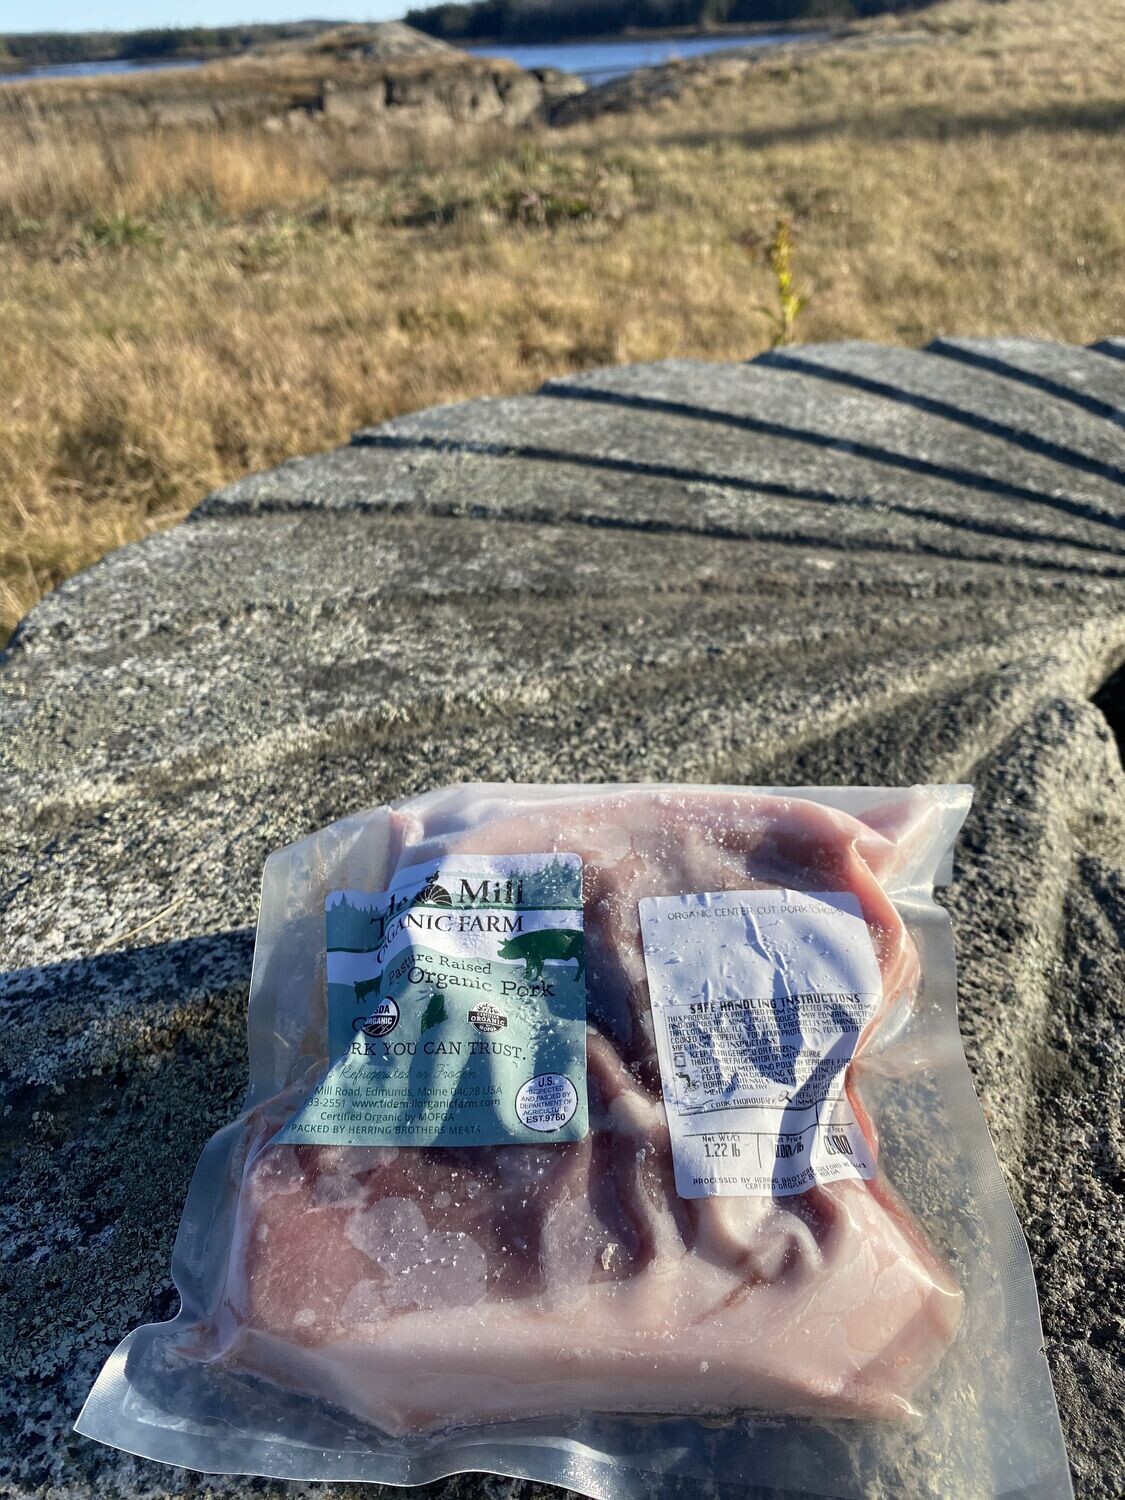 A package of certified organic pork